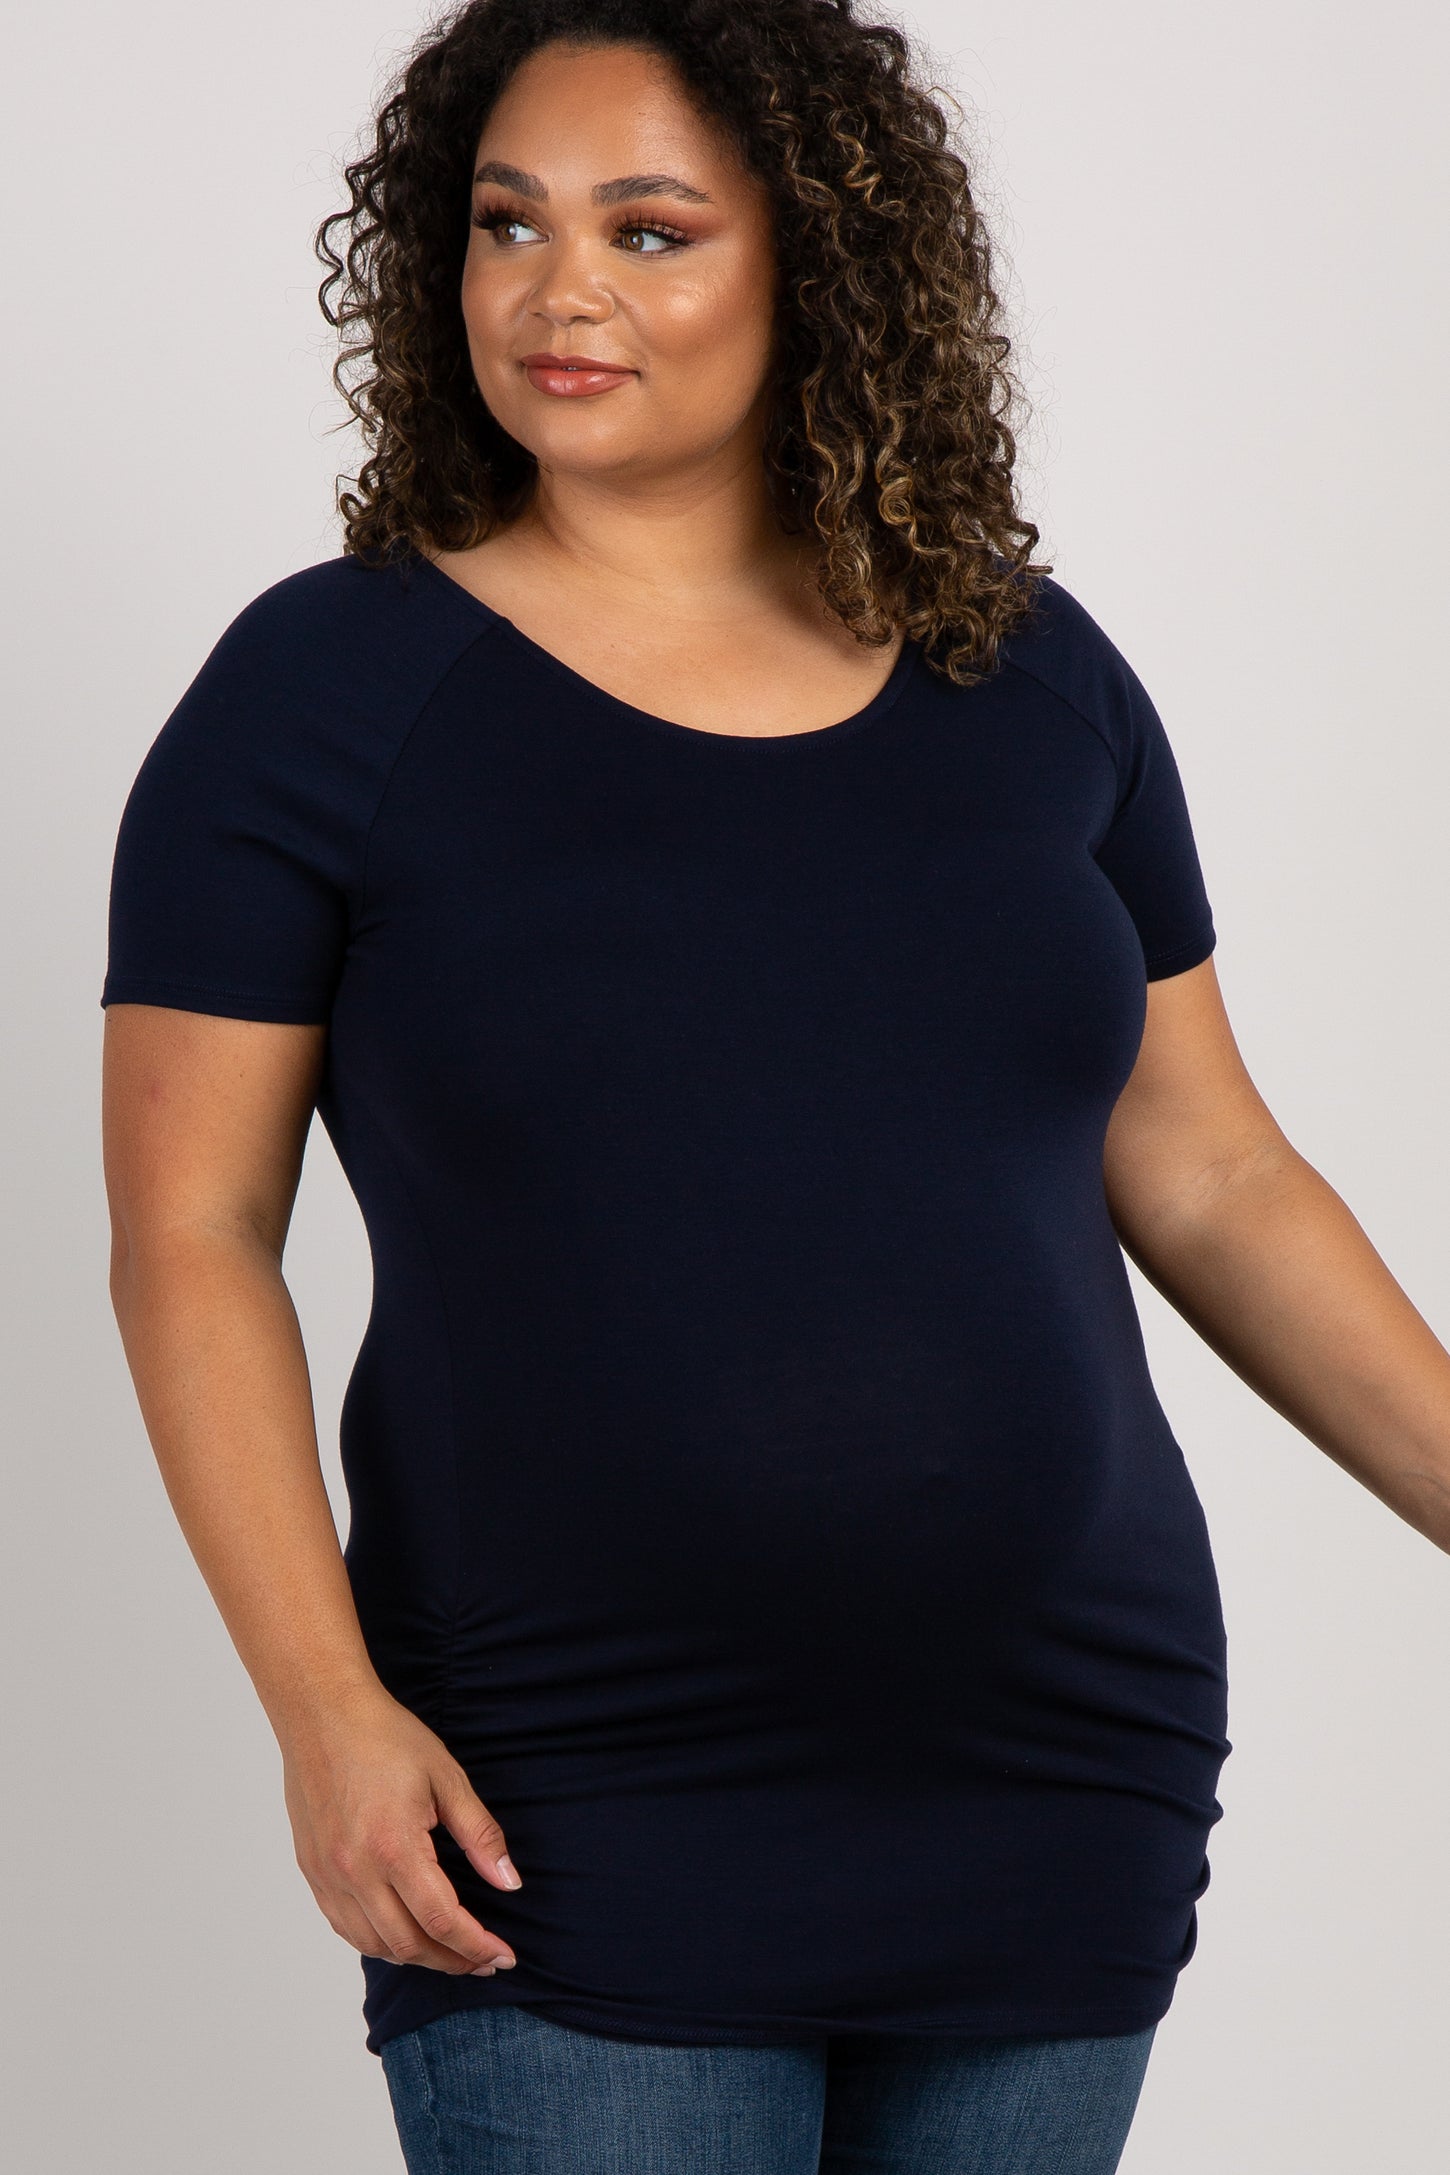 Navy Basic Fitted Short Sleeve Plus Maternity Top